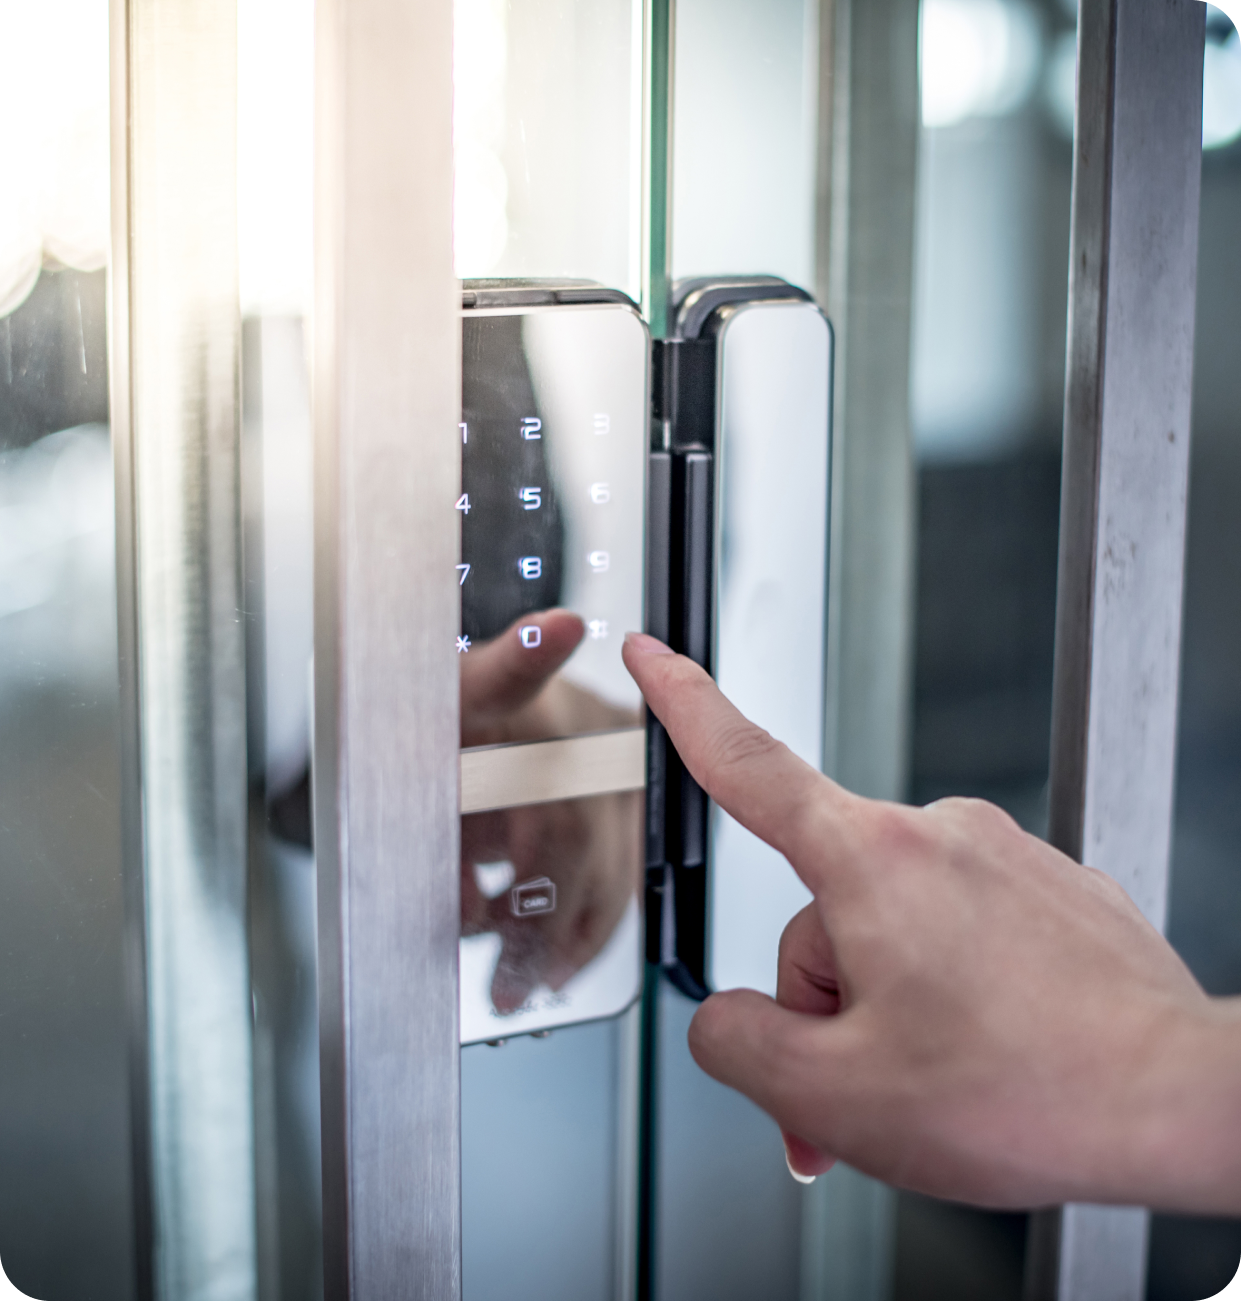 Access Control Systems in Business - PasWord Protection